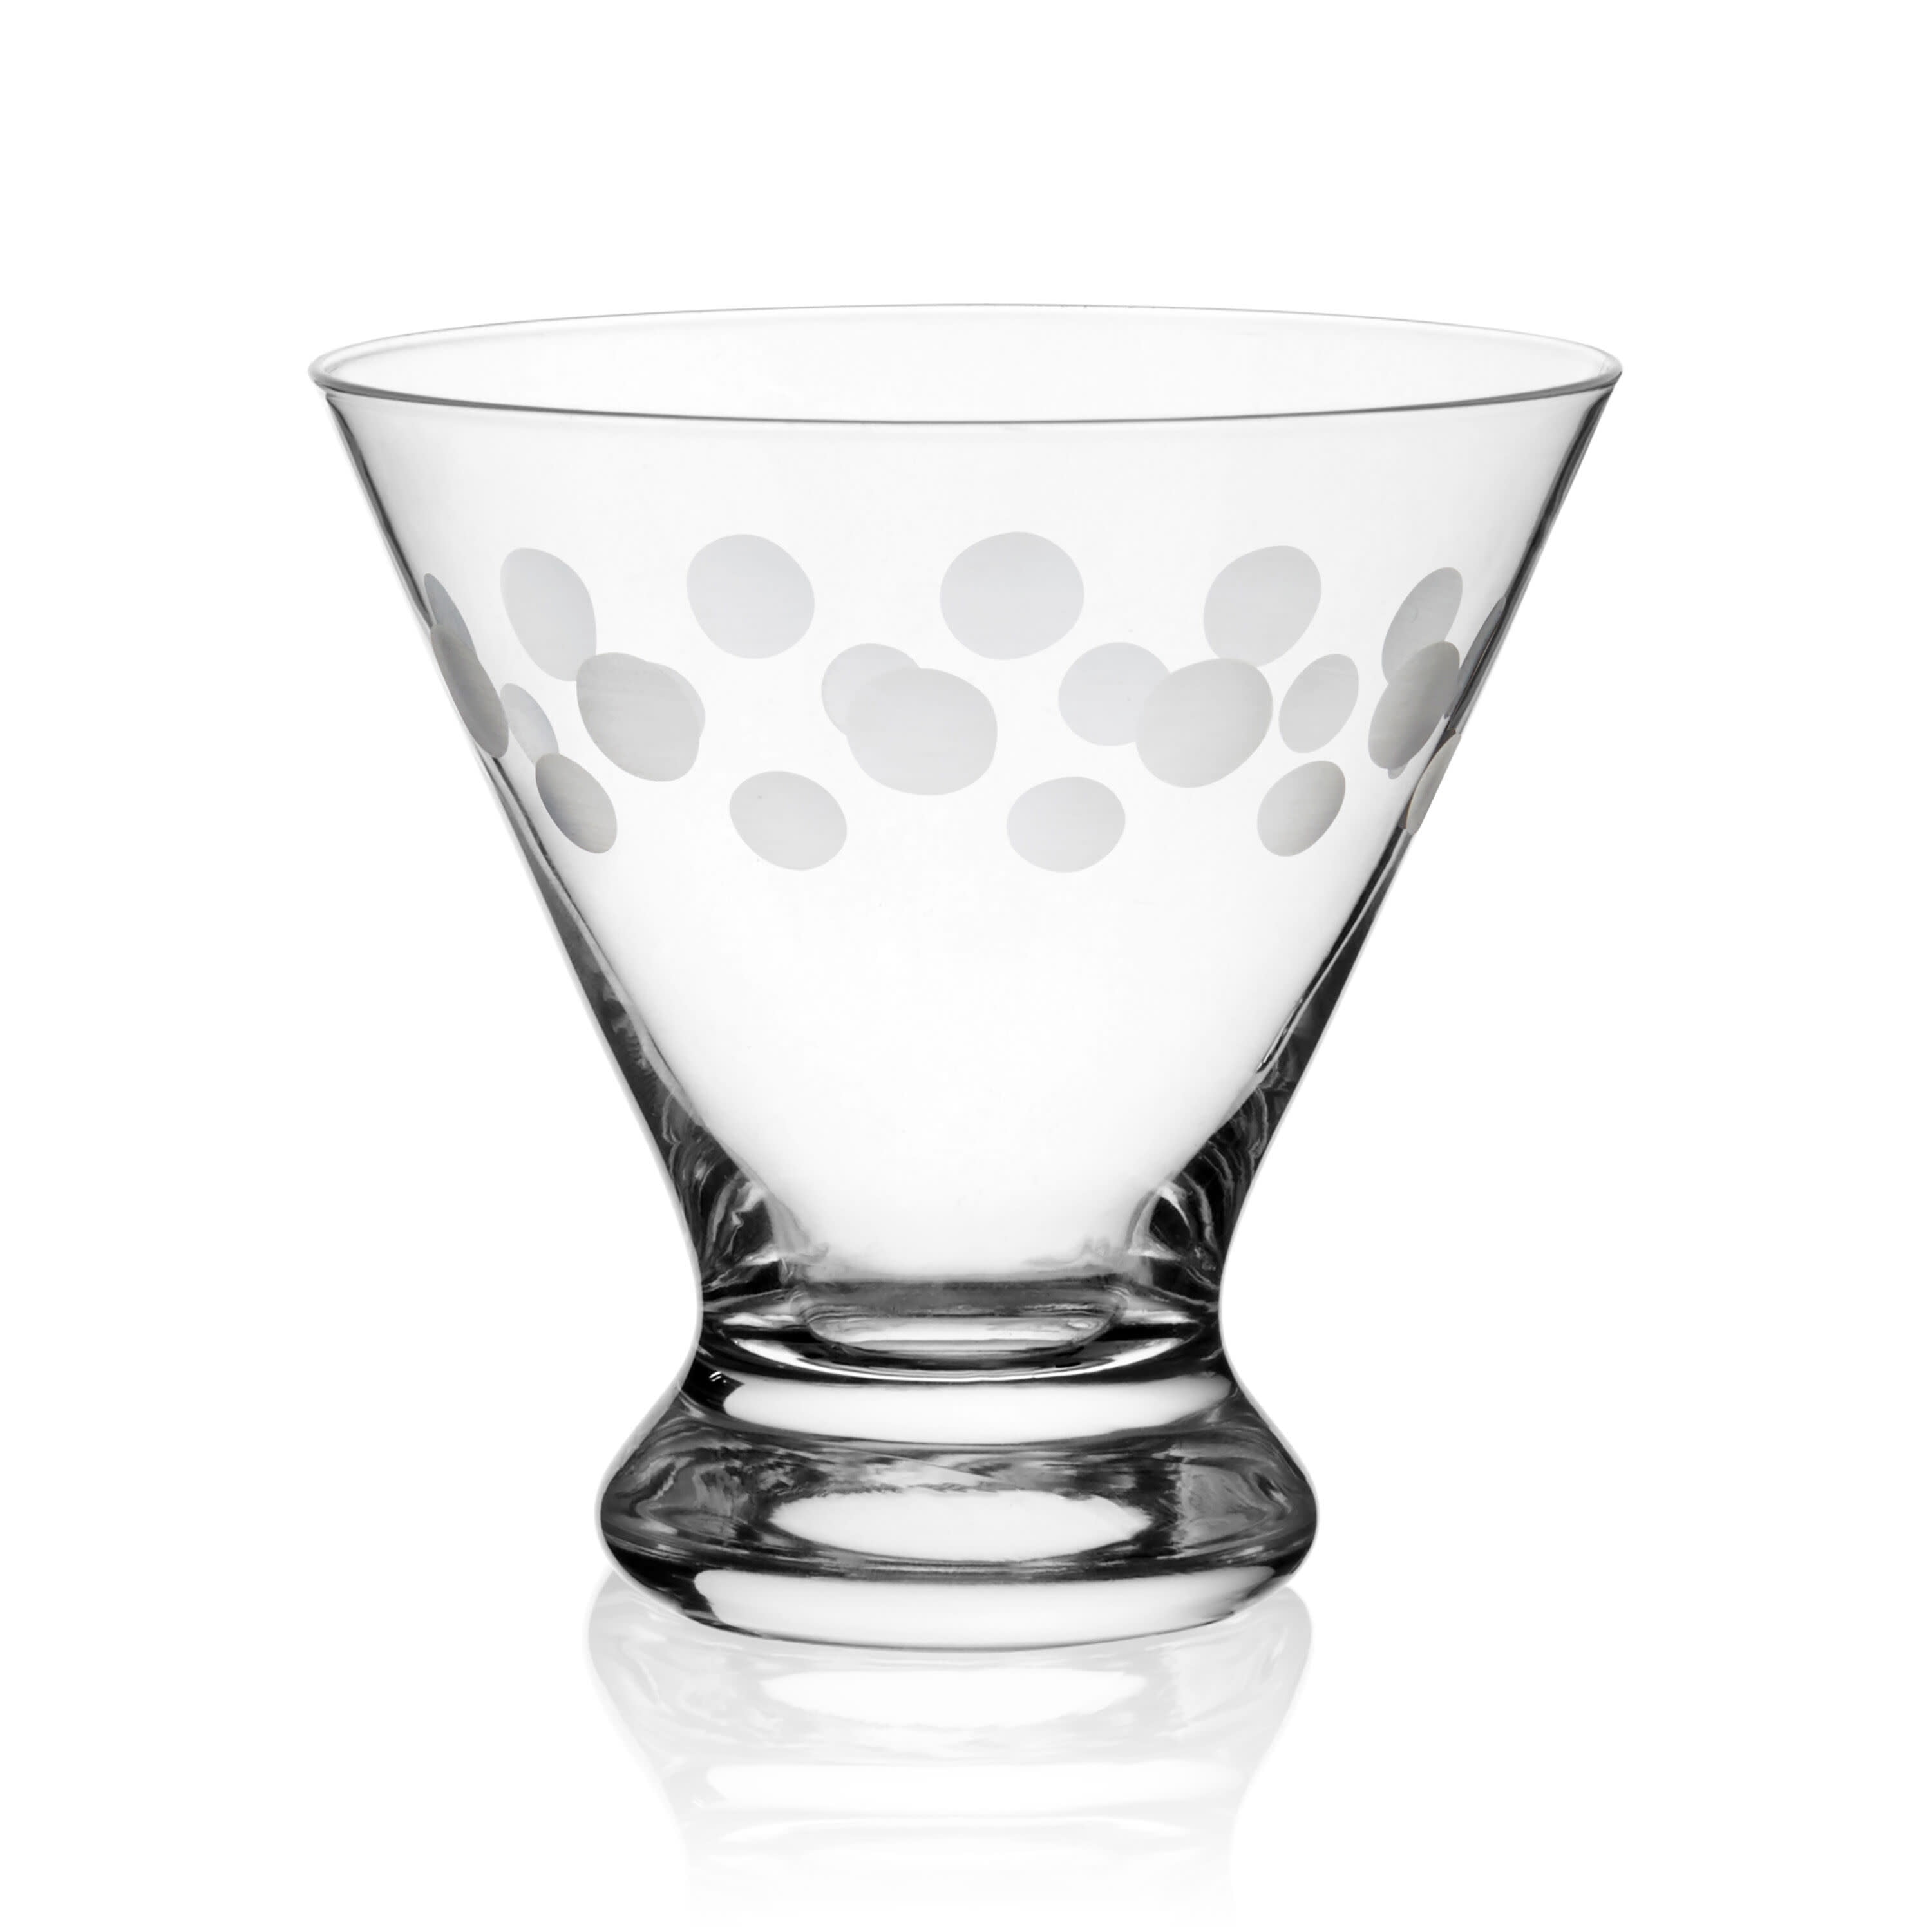 Mikasa Craft 12 Ounce Martini Cosmo Glass 4-Piece Set - Clear